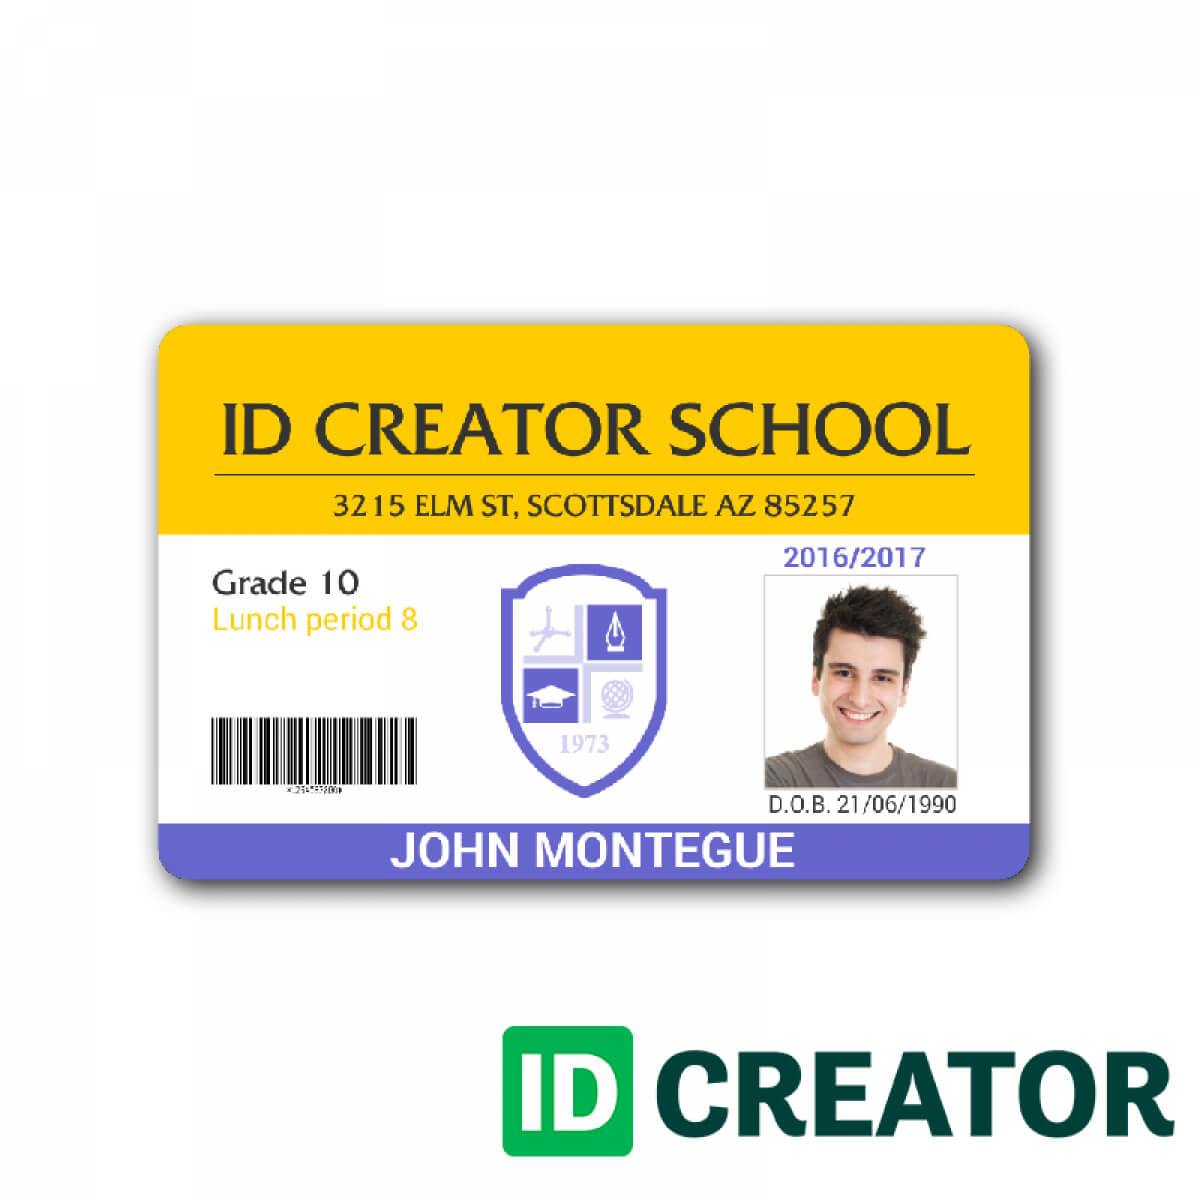 Child Id Card Template | Full Hd In 2019 | Id Card Template Inside Sample Of Id Card Template